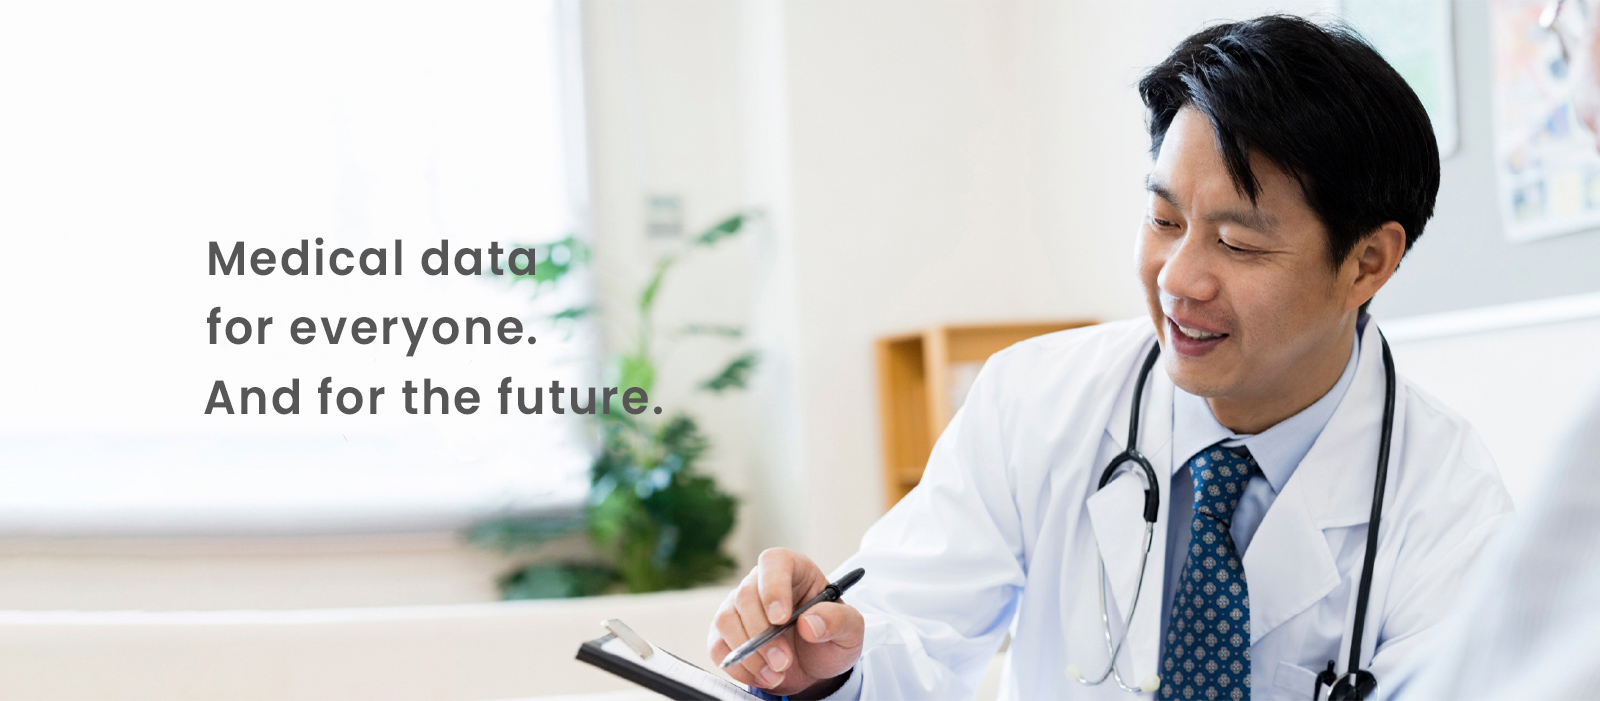 Medical data for everyone.And for the future.